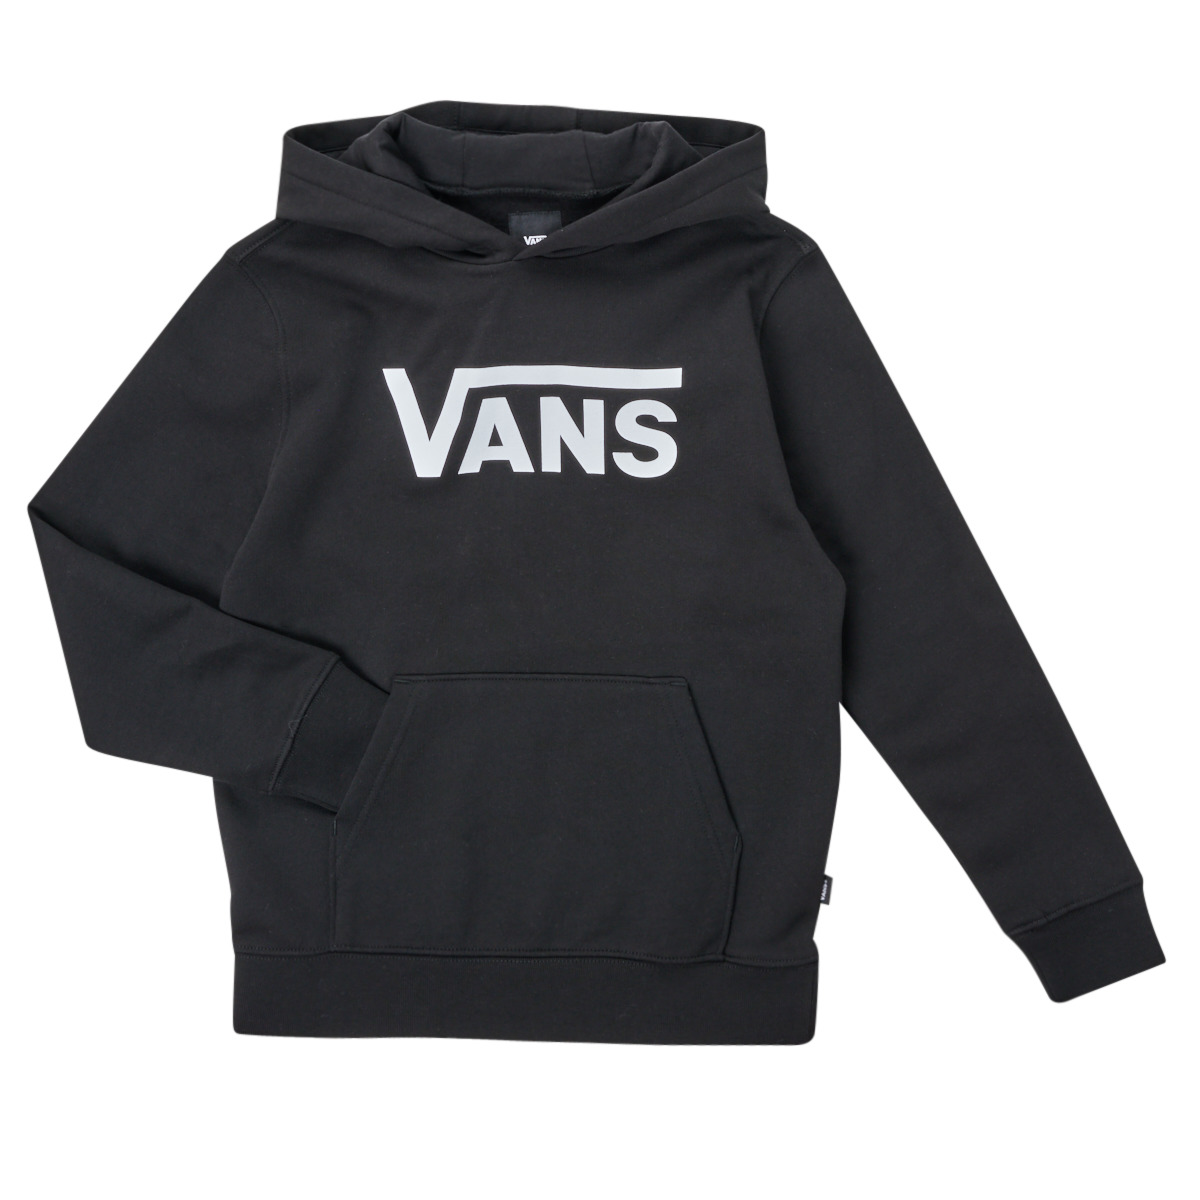 Vans BY VANS CLASSIC PO KIDS Black - Free delivery | Spartoo NET ! -  Clothing sweaters Child